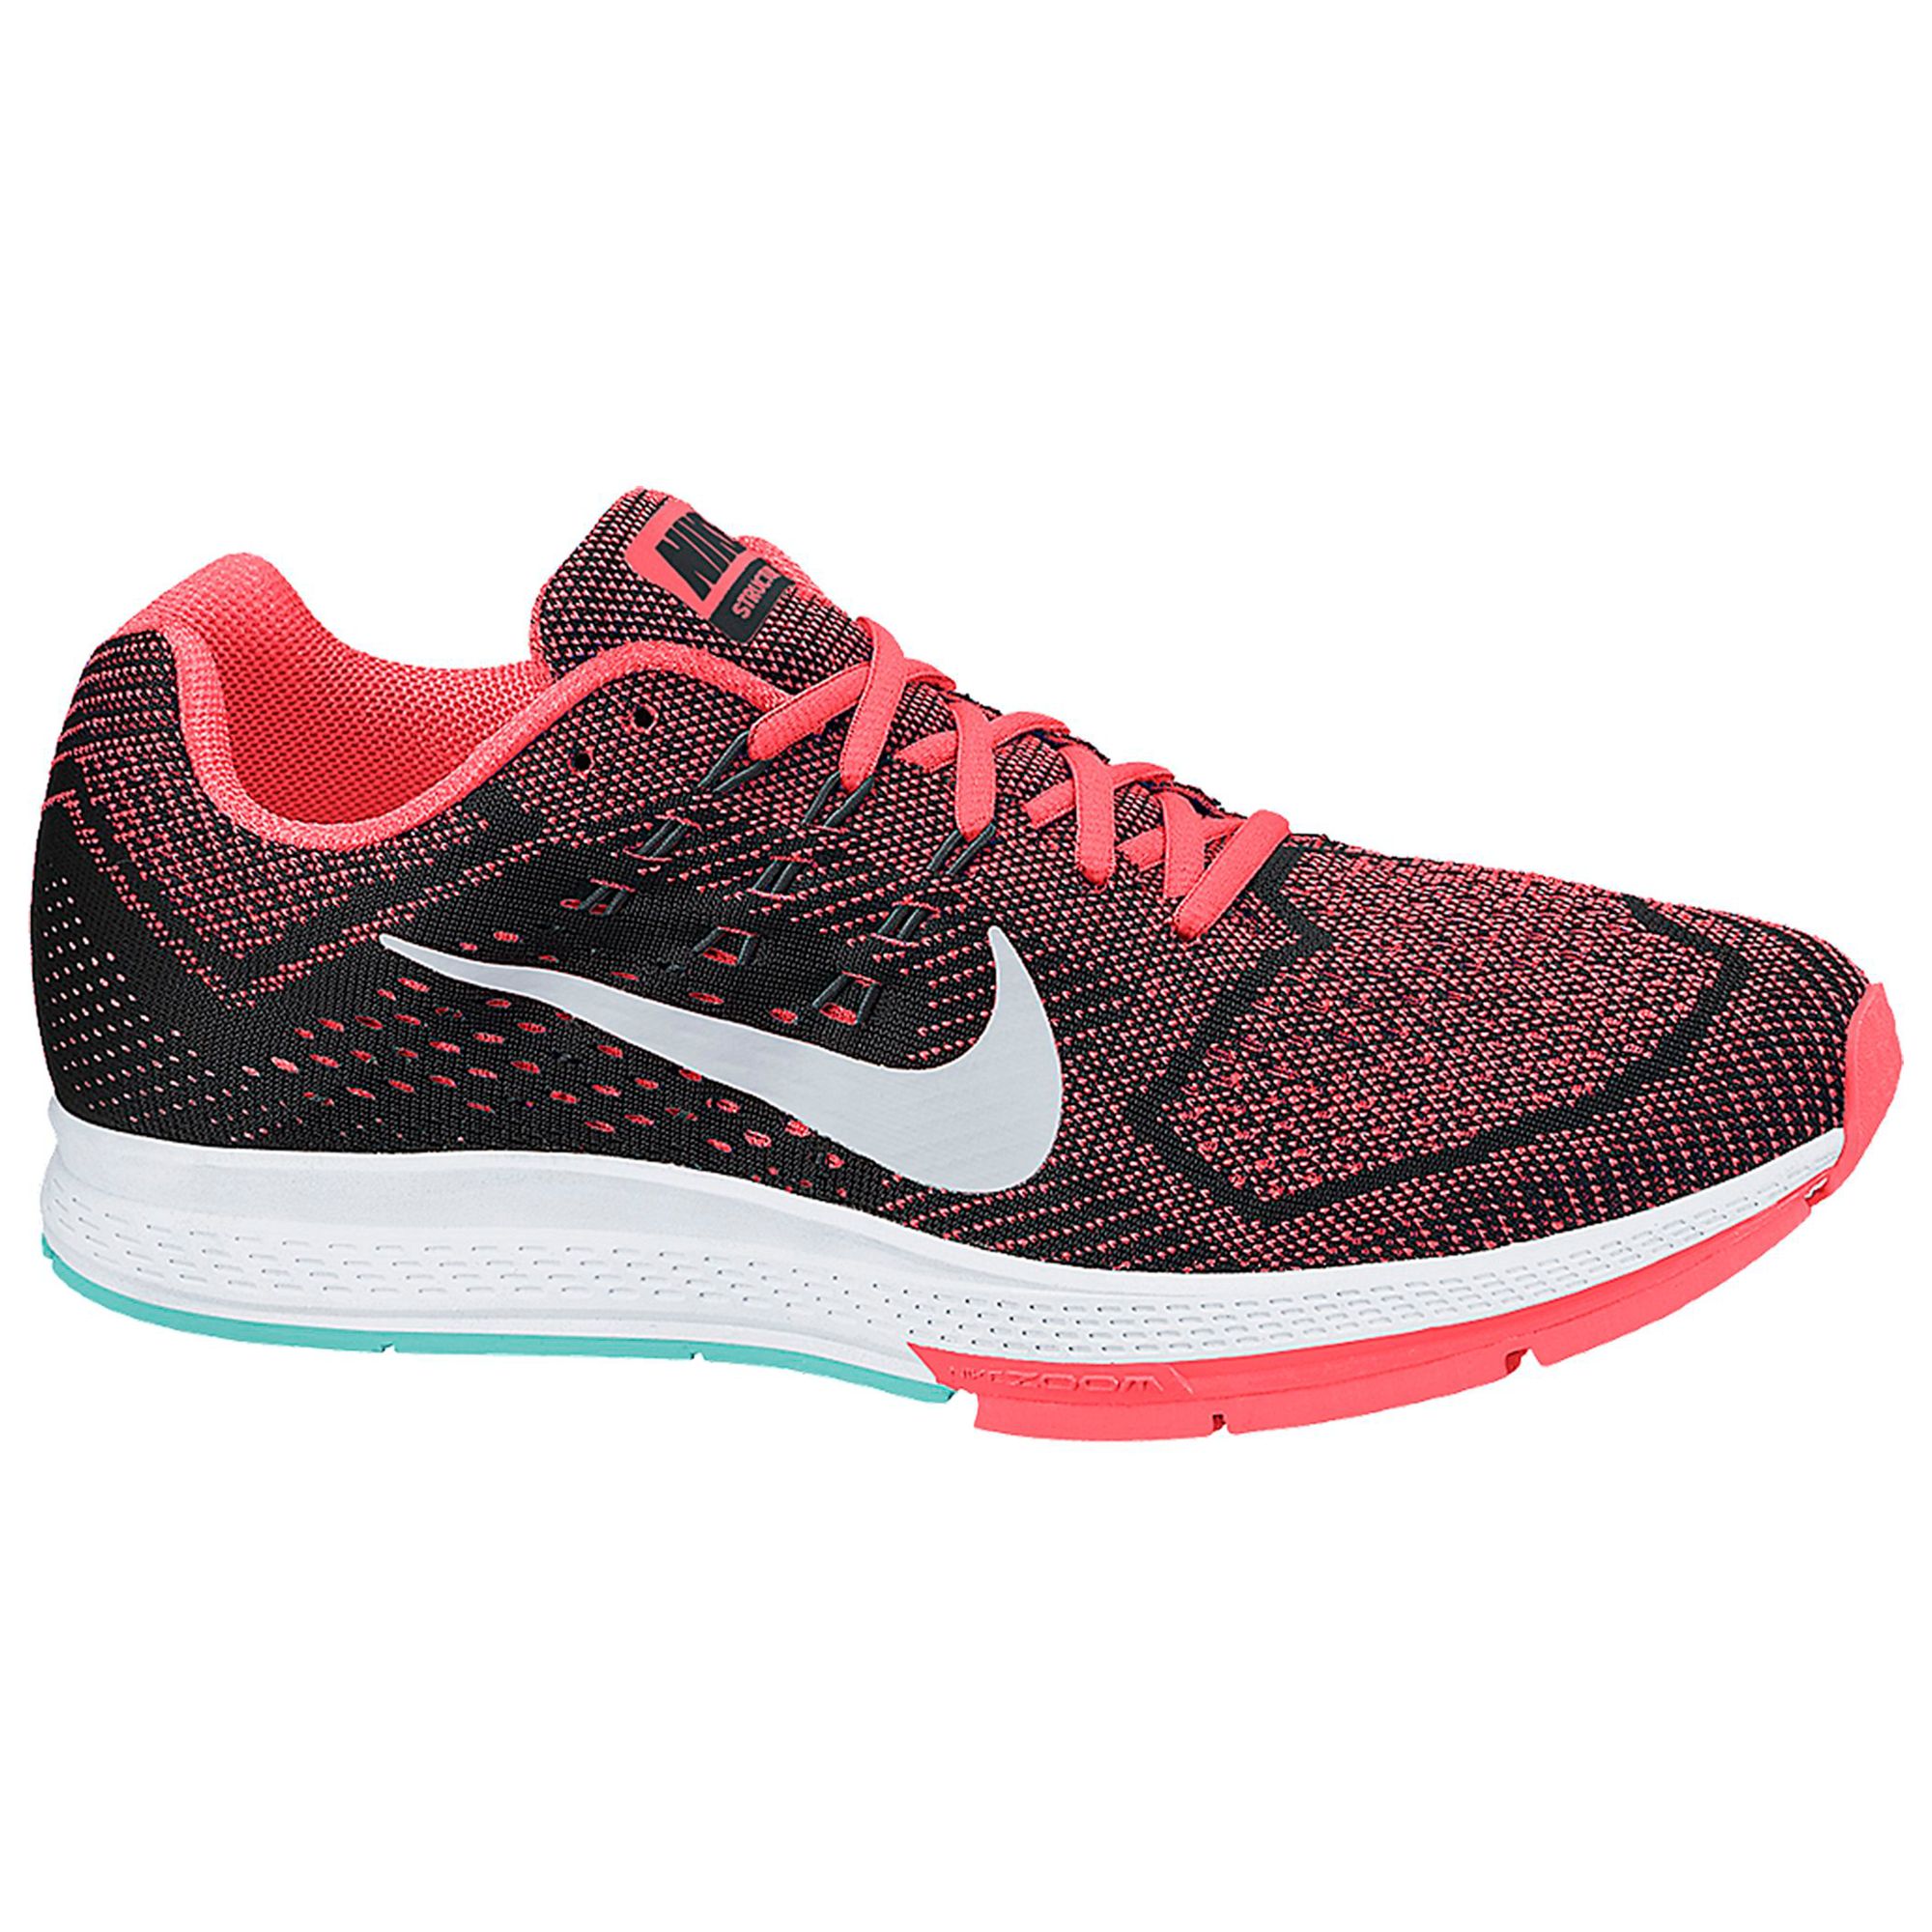 Nike Air Zoom Structure 18 Women's Running Shoes